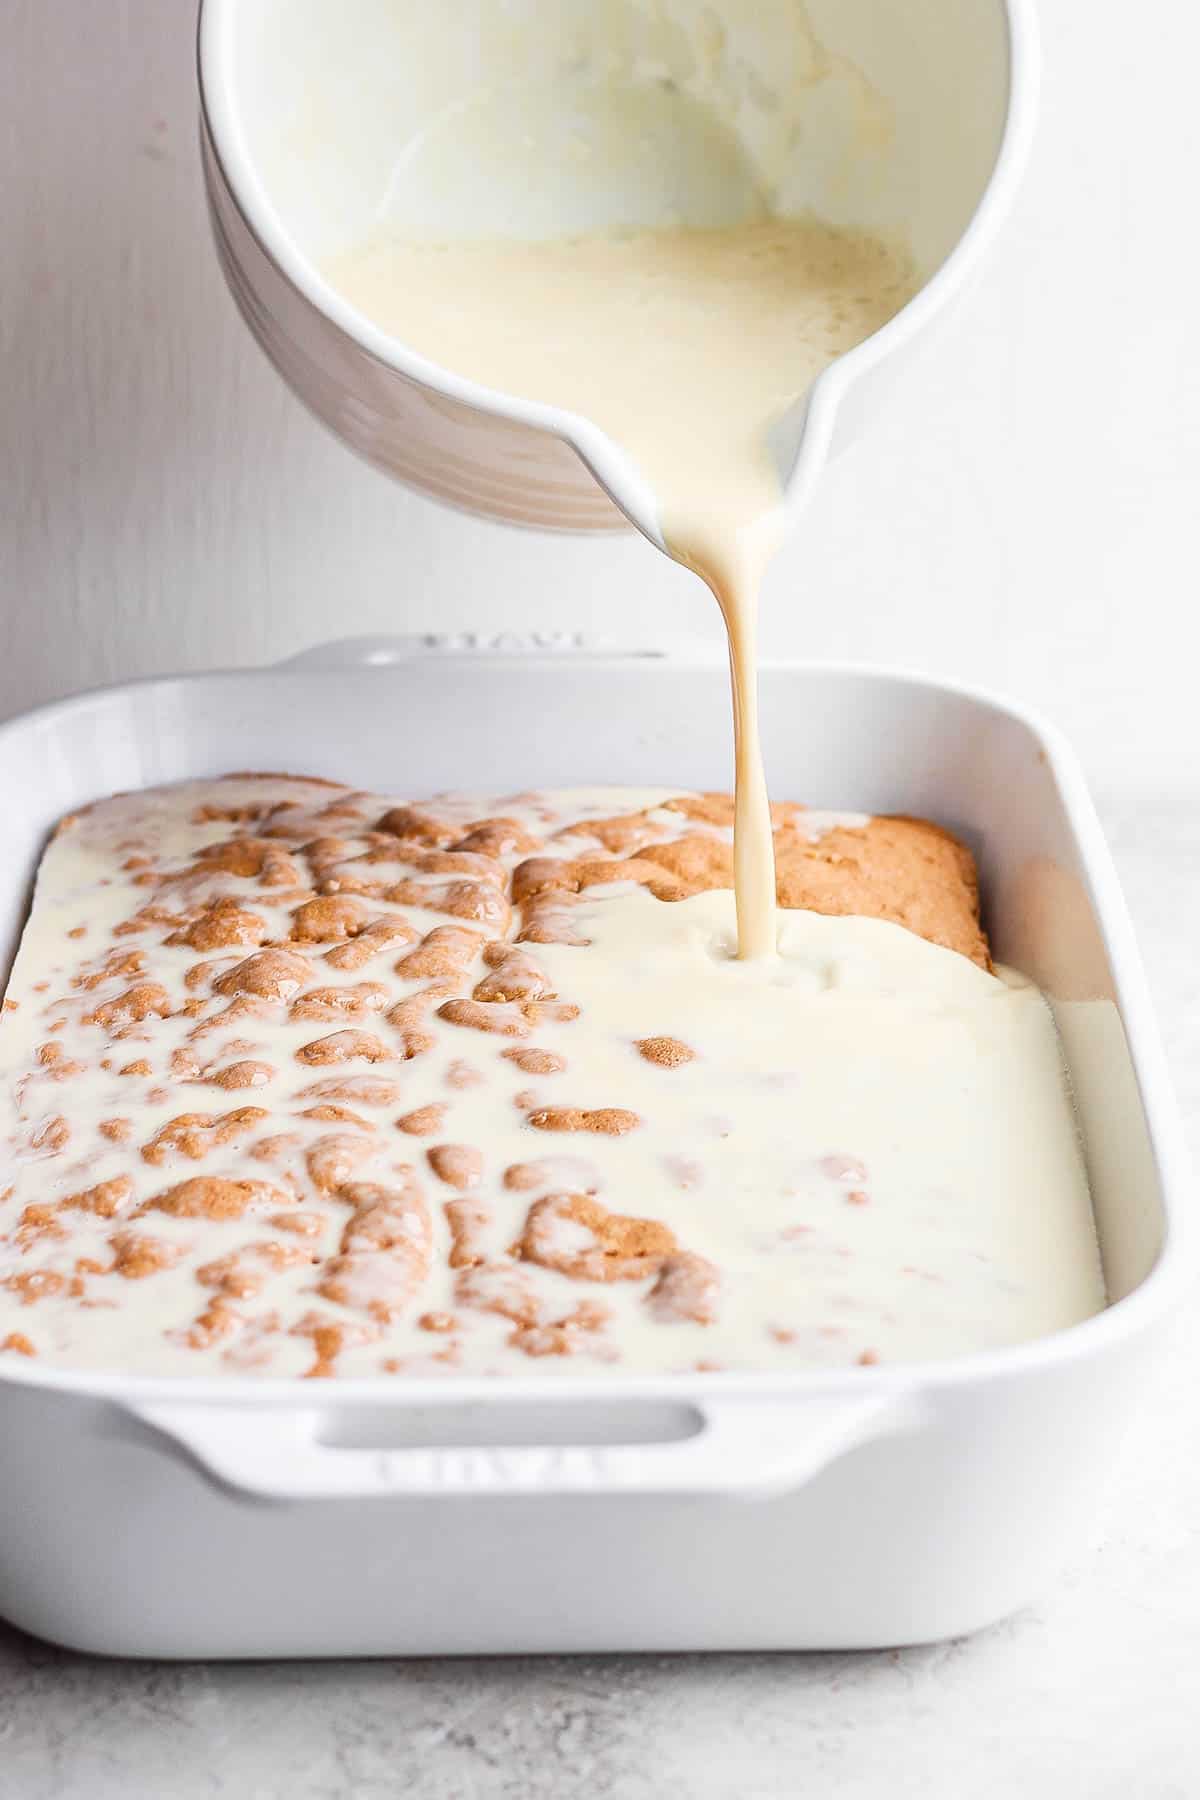 The three-milk mixture being poured all over the poked sponge of the tres leches cake.